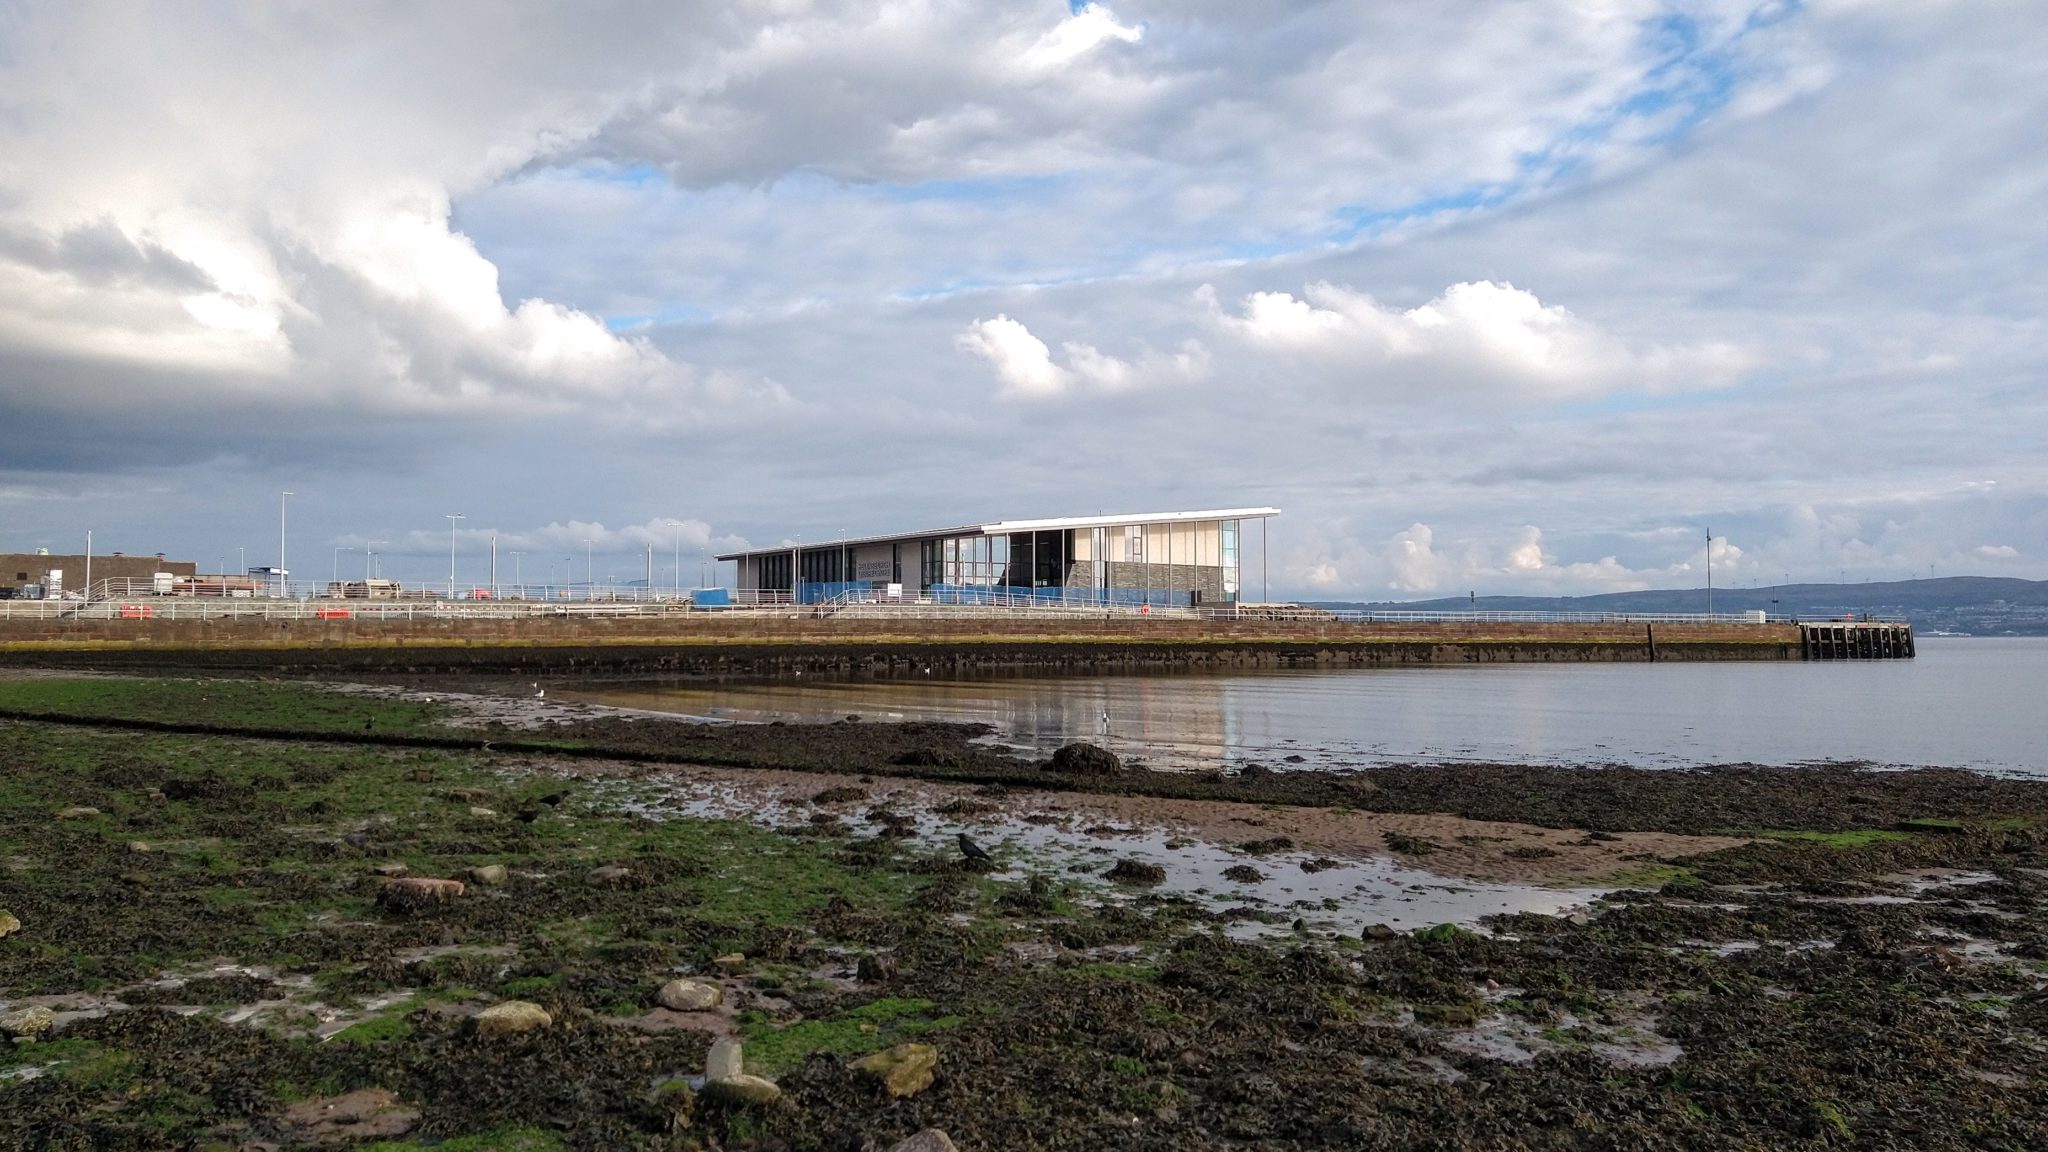 Helensburgh pier and leisure centre from the west bay